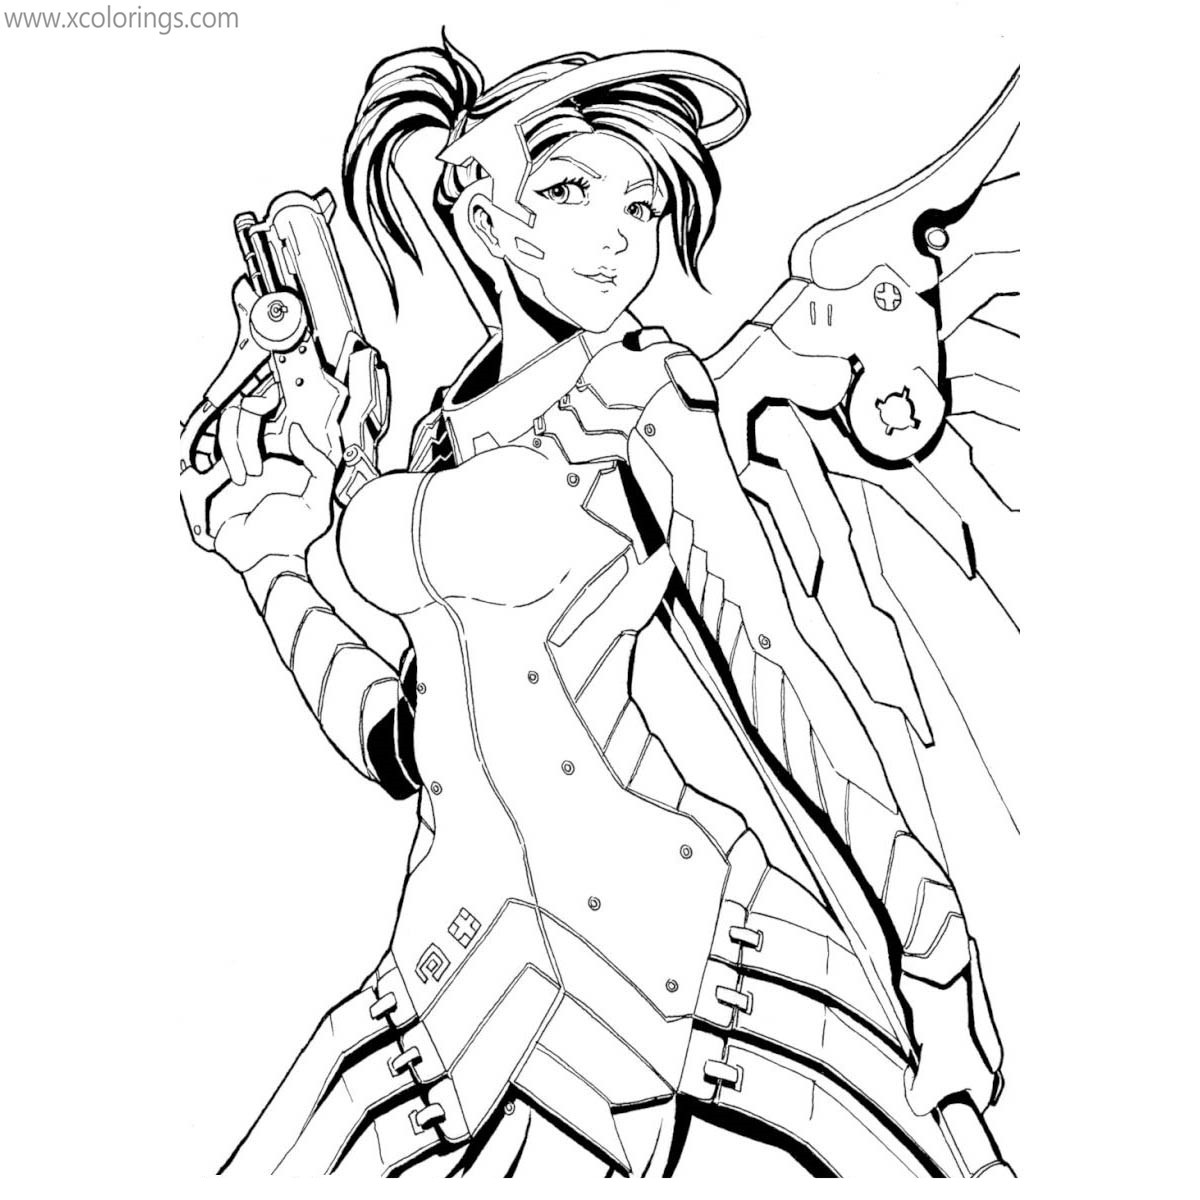 Free Overwatch Coloring Pages D VA the Tank printable